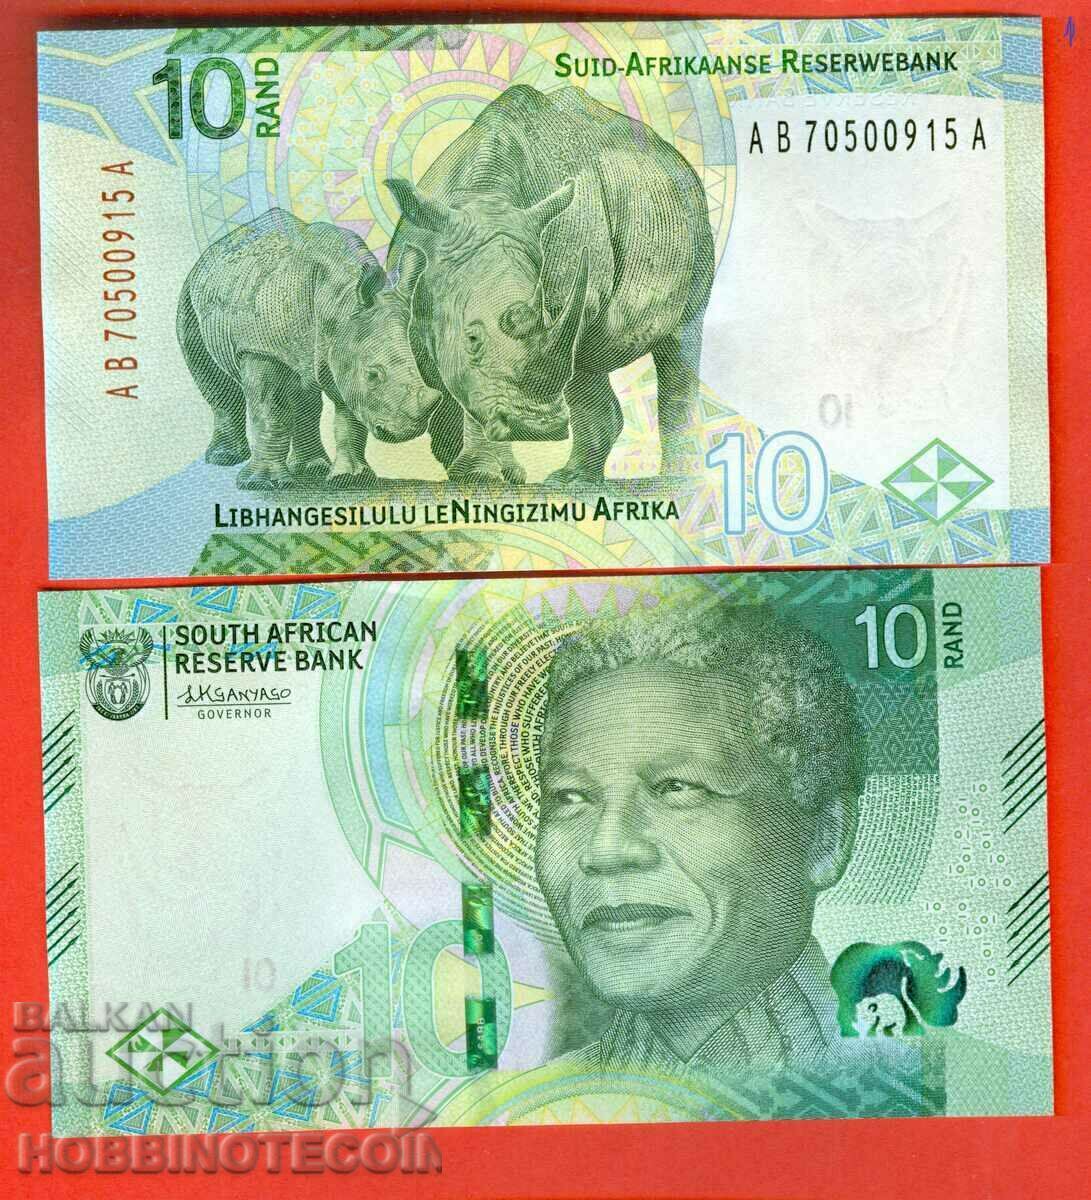 ЮЖНА АФРИКА ЮАР SOUTH AFRICA 10 Ранд issue 2023 НОВИ UNC